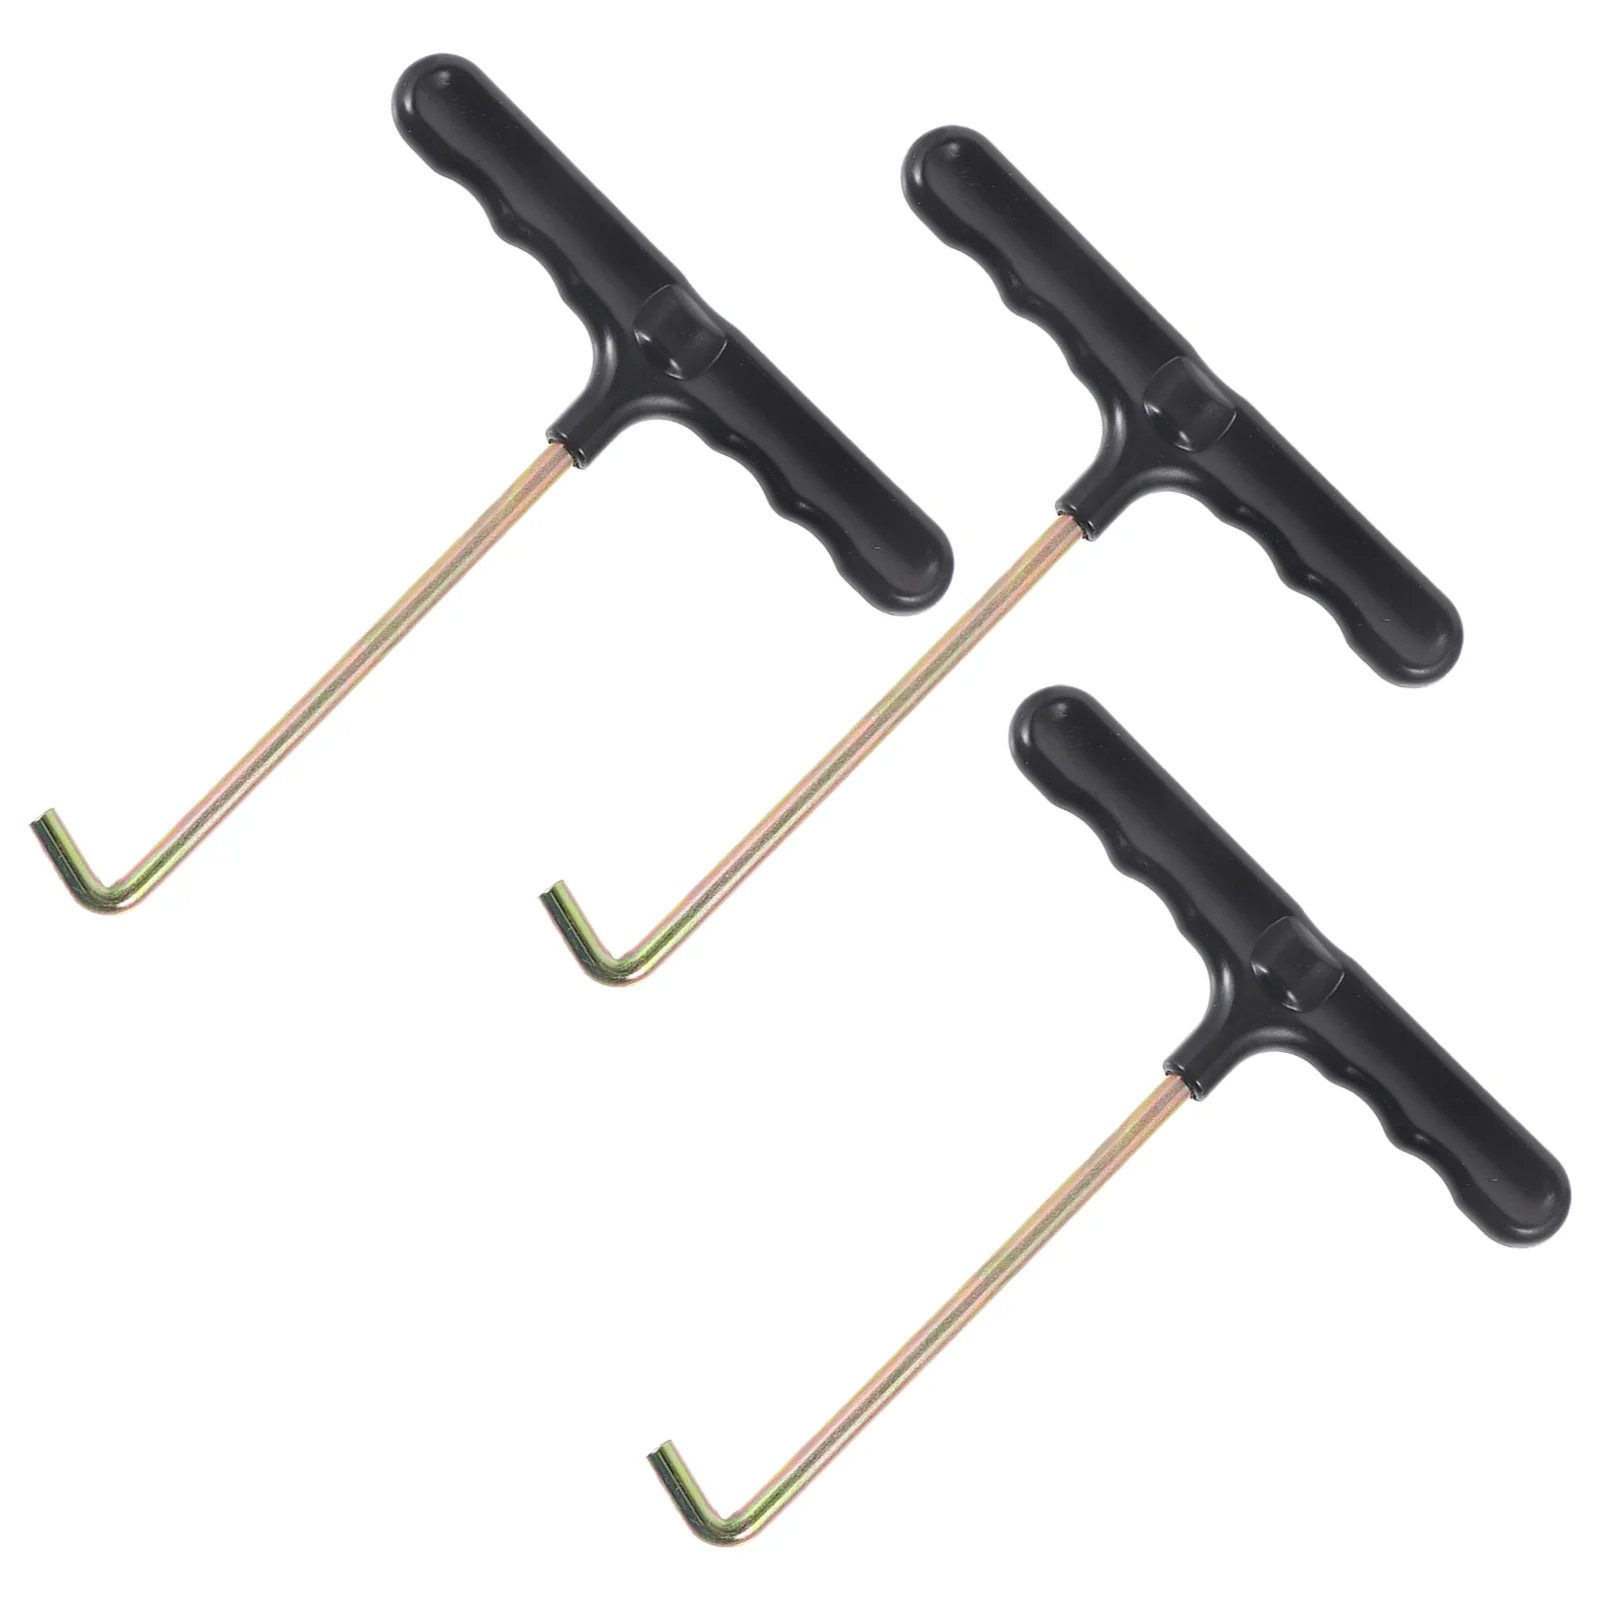 

3 Pcs Laces Skate Shoe Hook Portable Shoelace Tighteners Hockey T-shaped Puller Tightening Tool Pullers